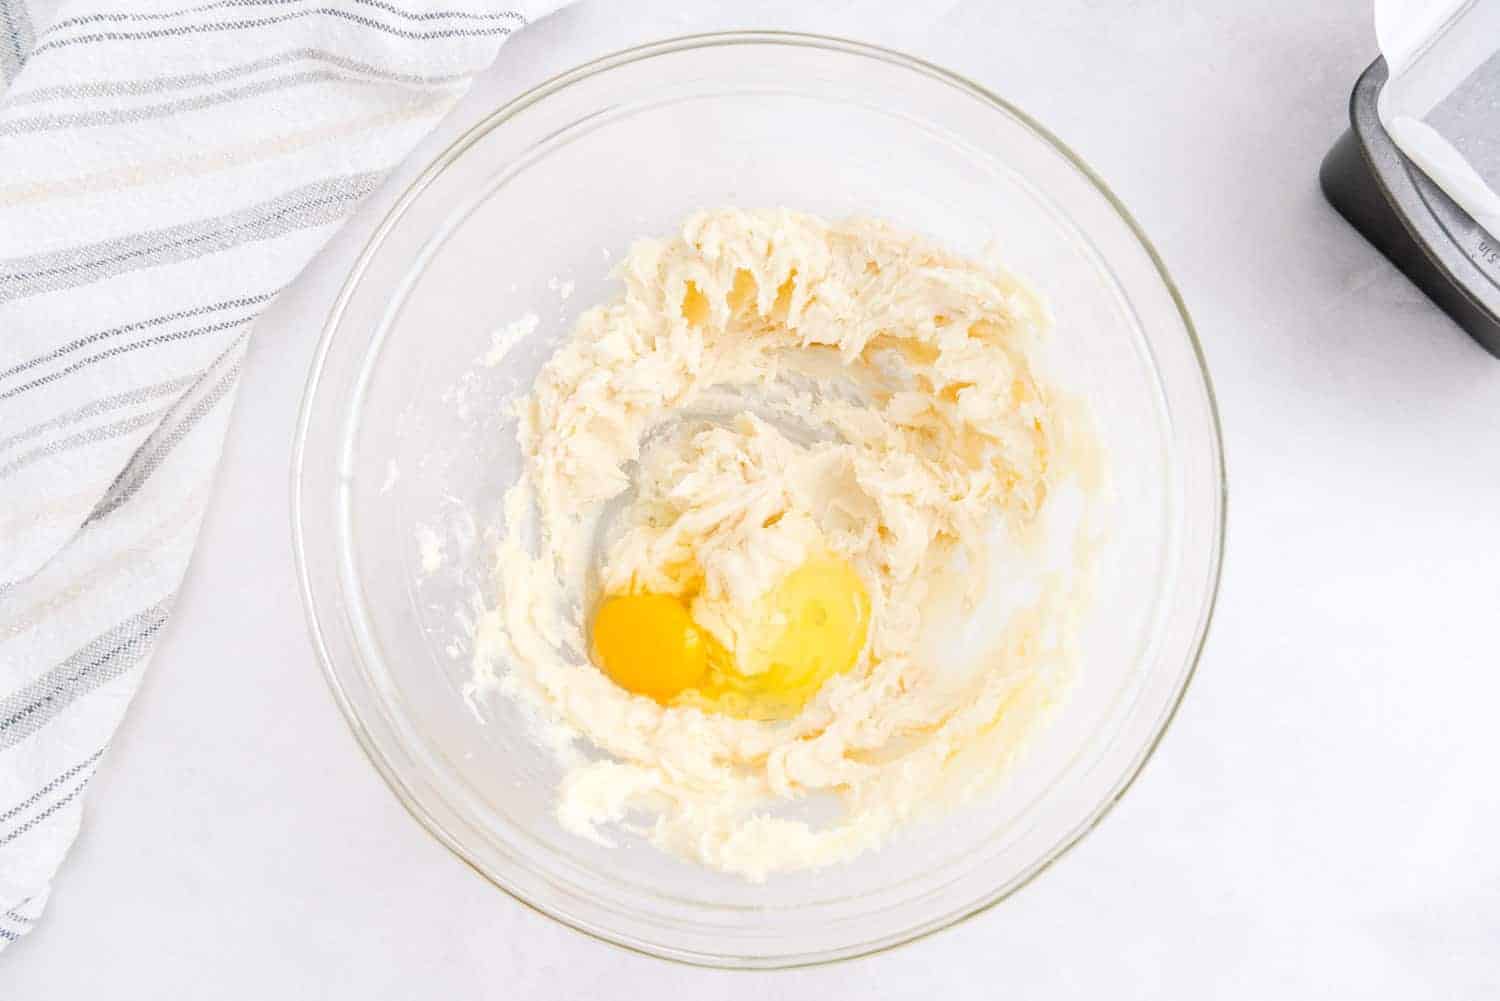 Egg added to butter and sugar.